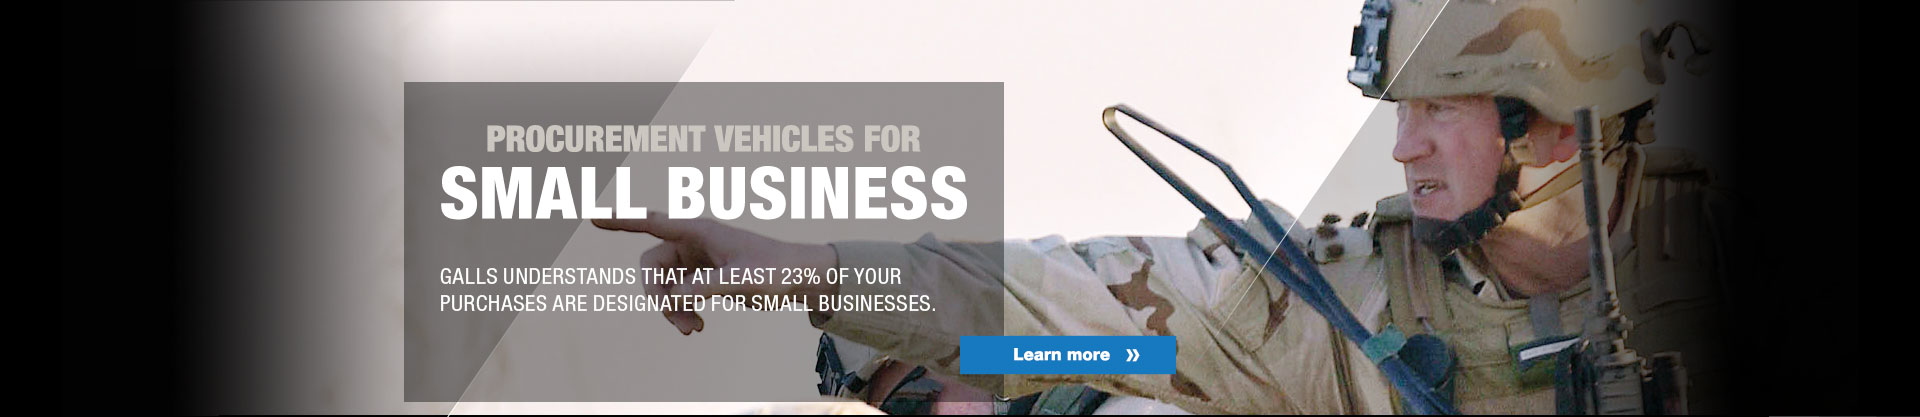 Procurement vehicles for small business